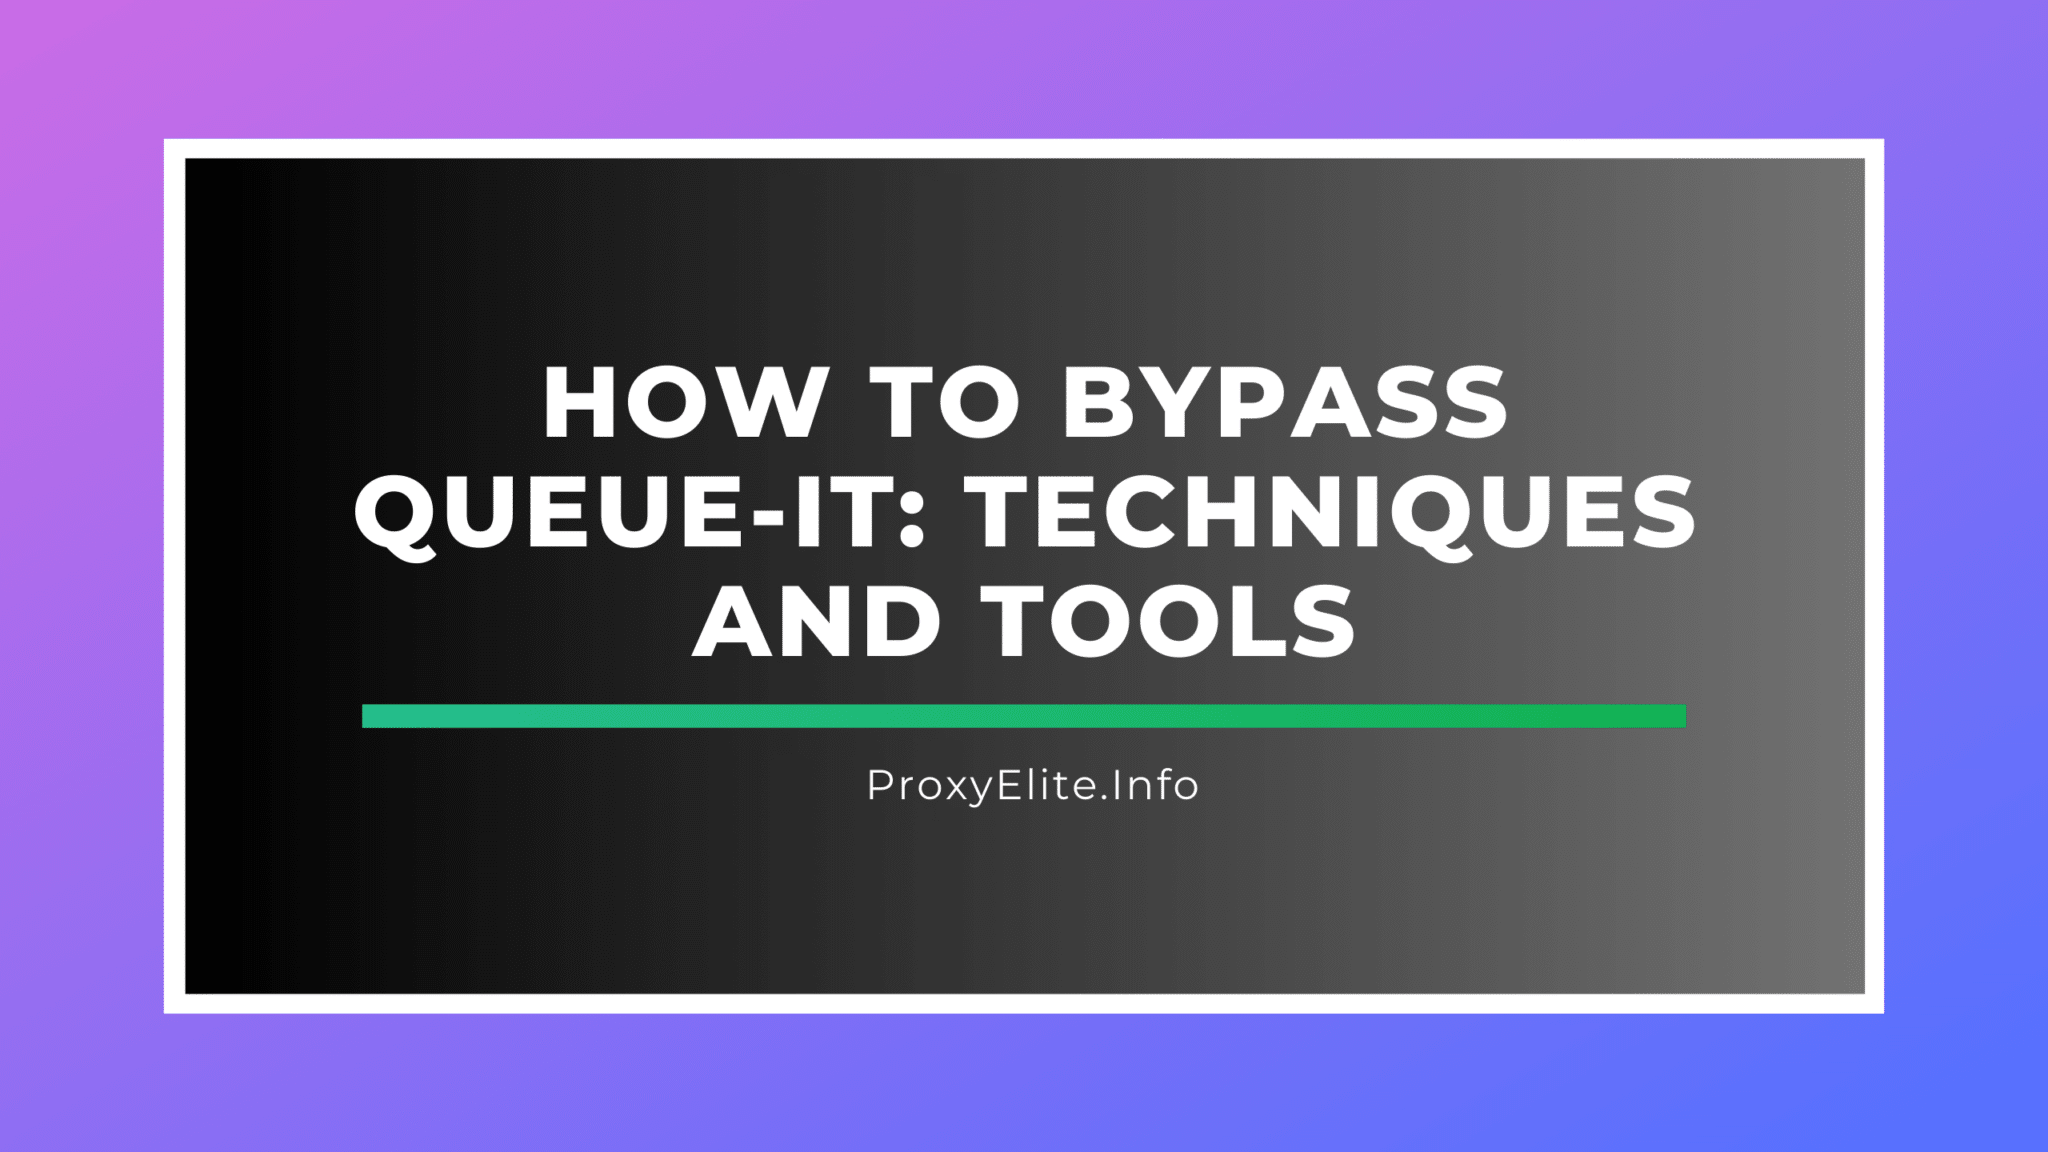 How to Bypass Queue-It: Techniques and Tools